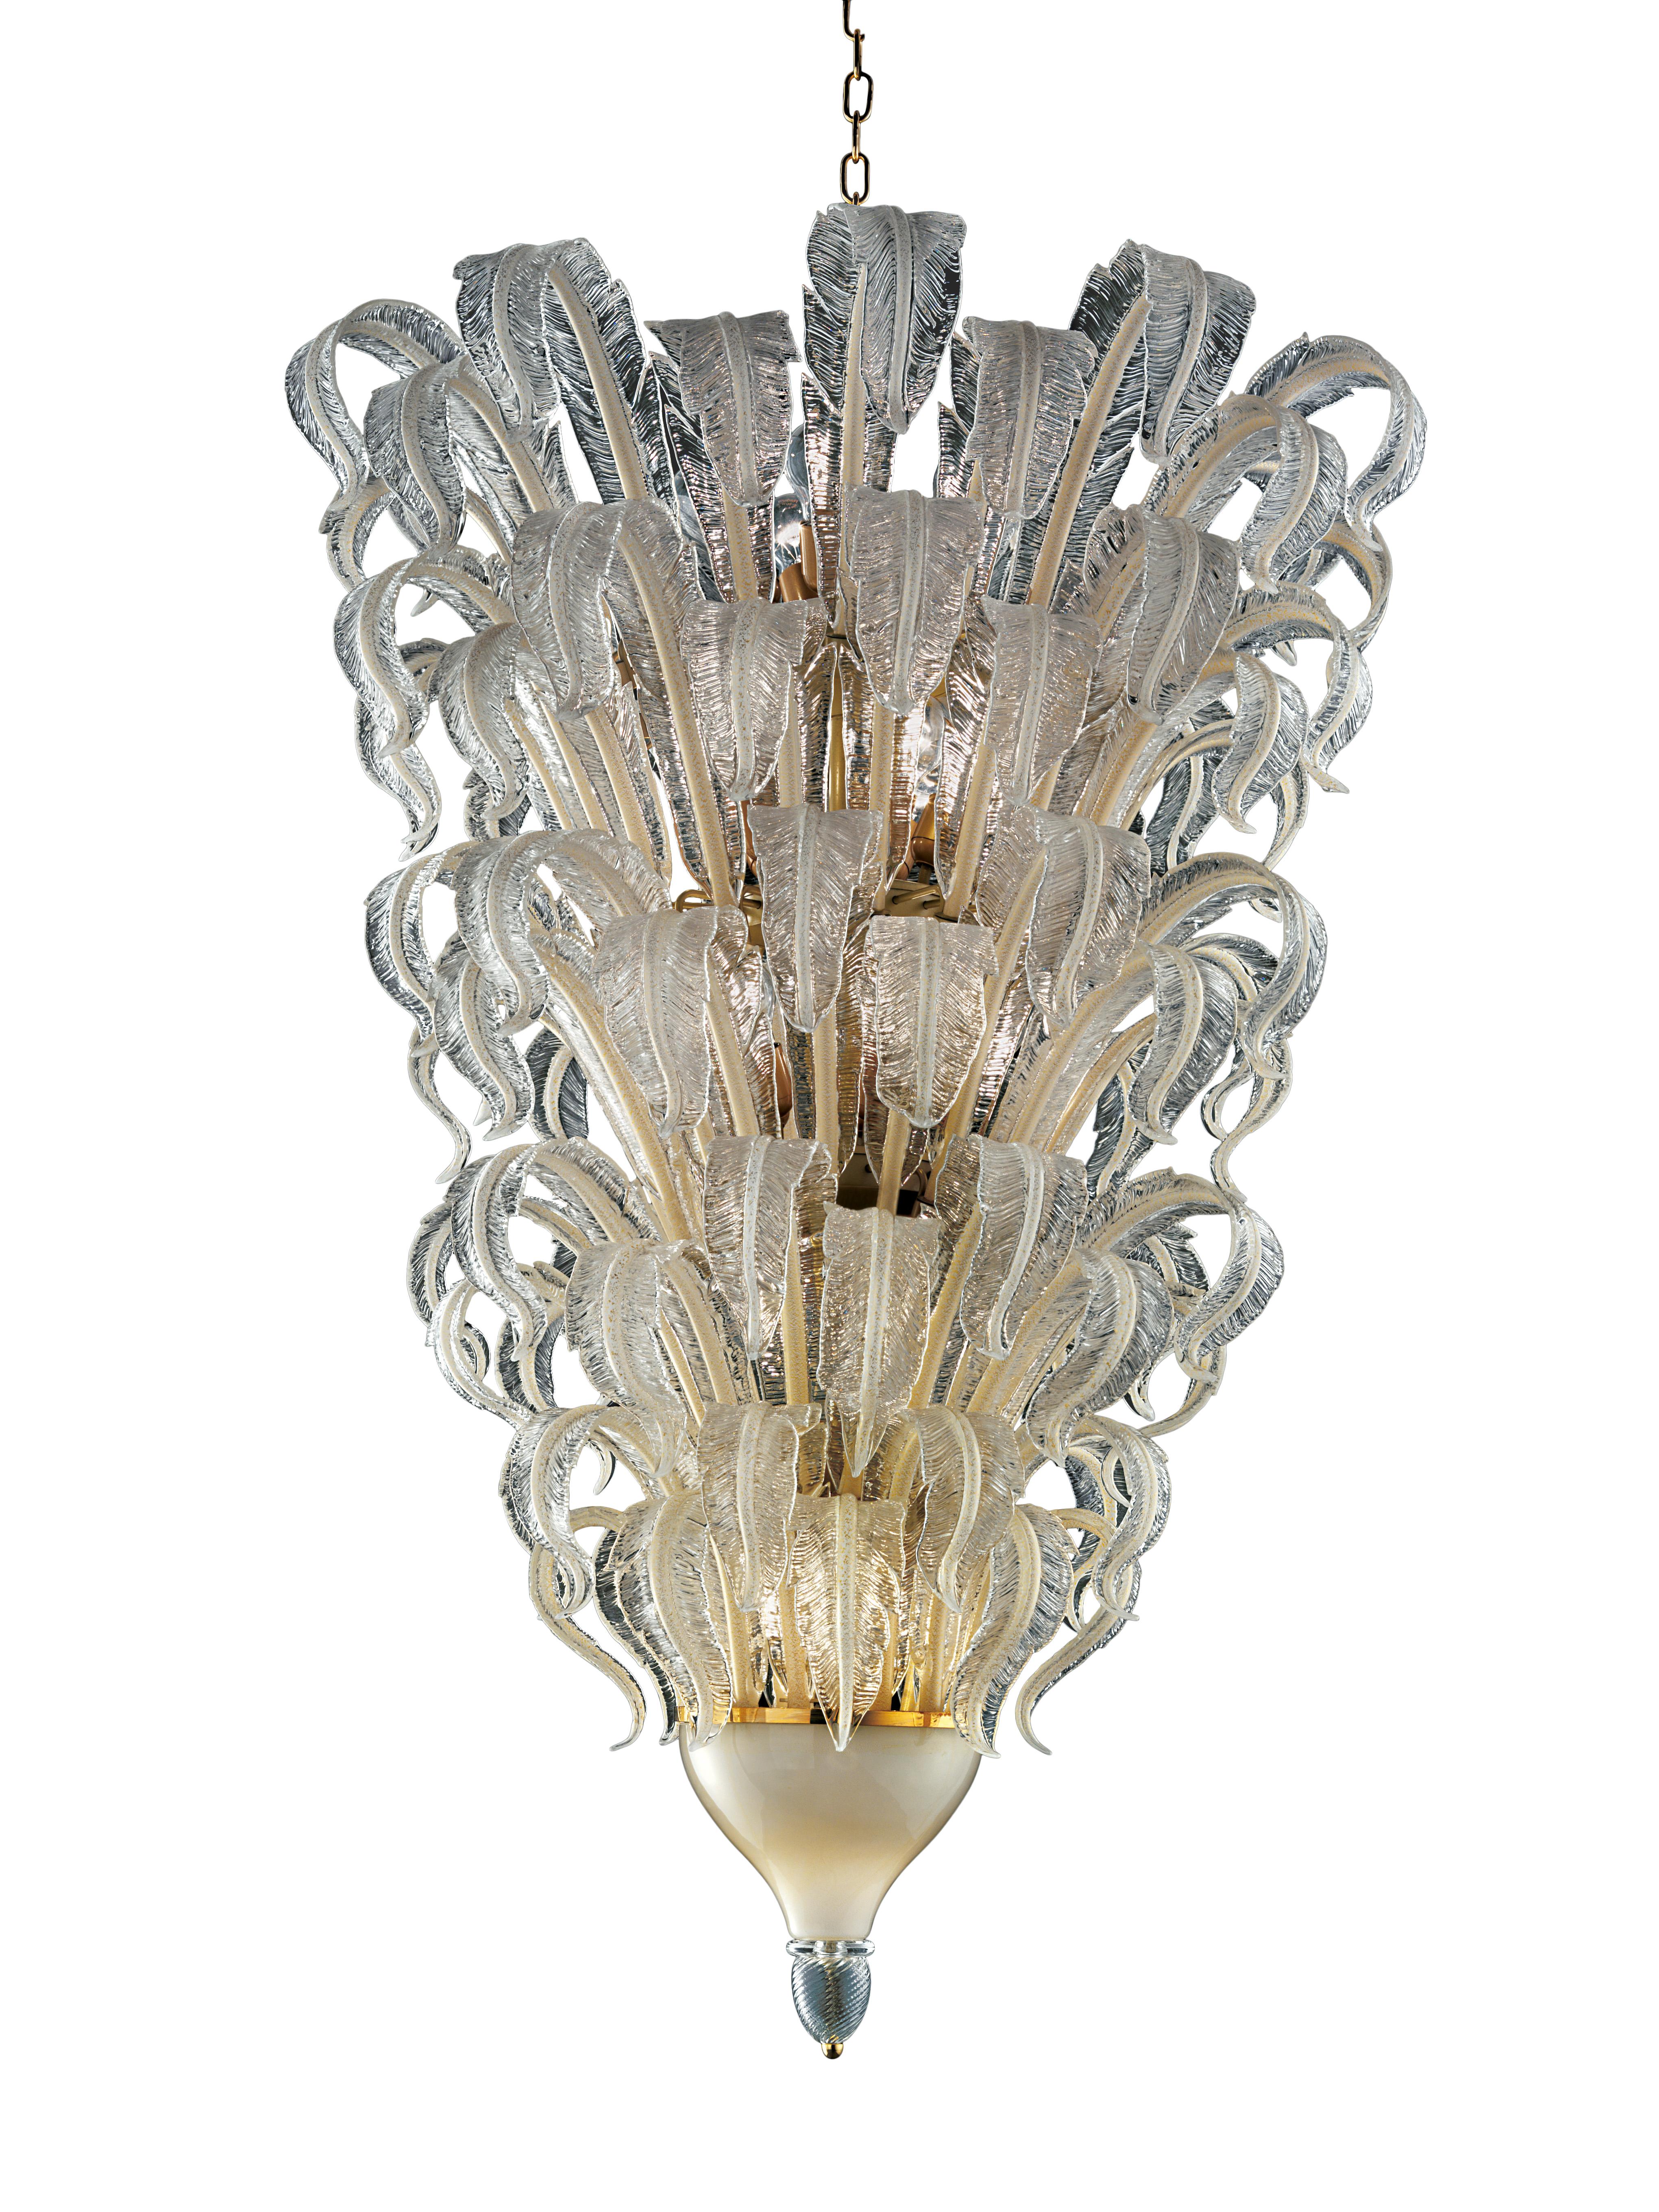 Piume 5397 Suspension Lamp in Beige Gold Glass, by Barovier&Toso